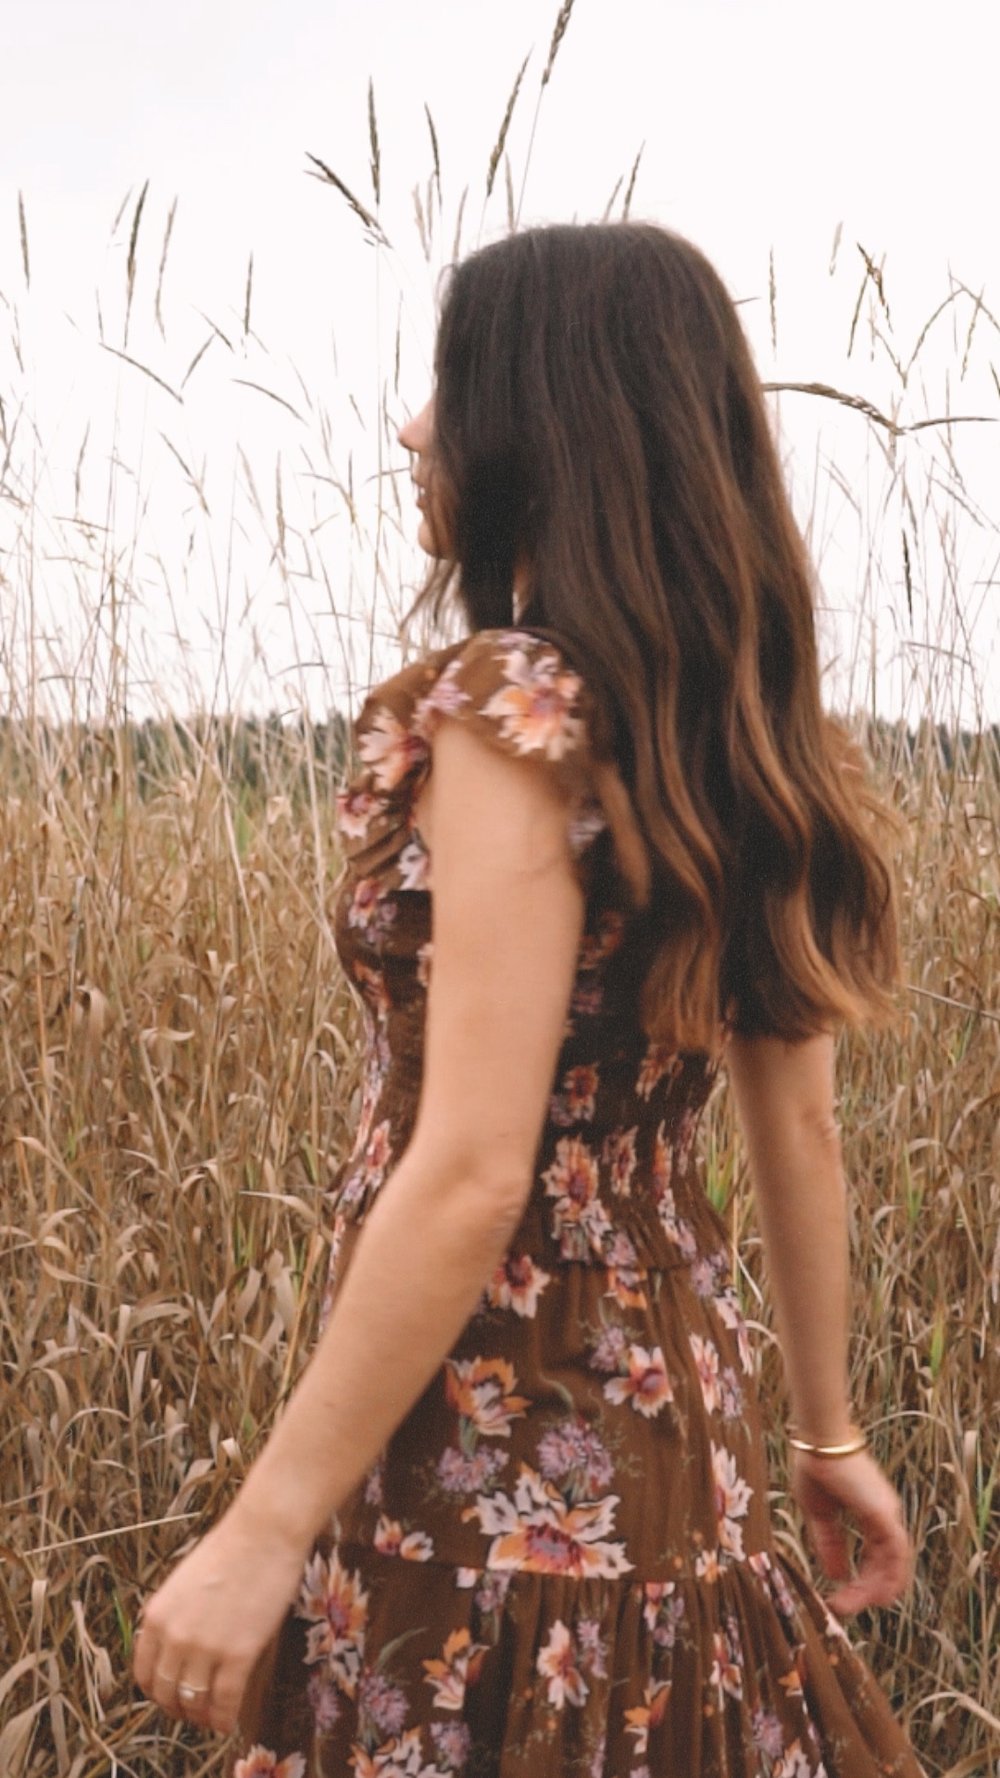 Sarah Butler of @sarahchristine wearing Brown Floral Fall Midi Dress in autumn field -2.jpg